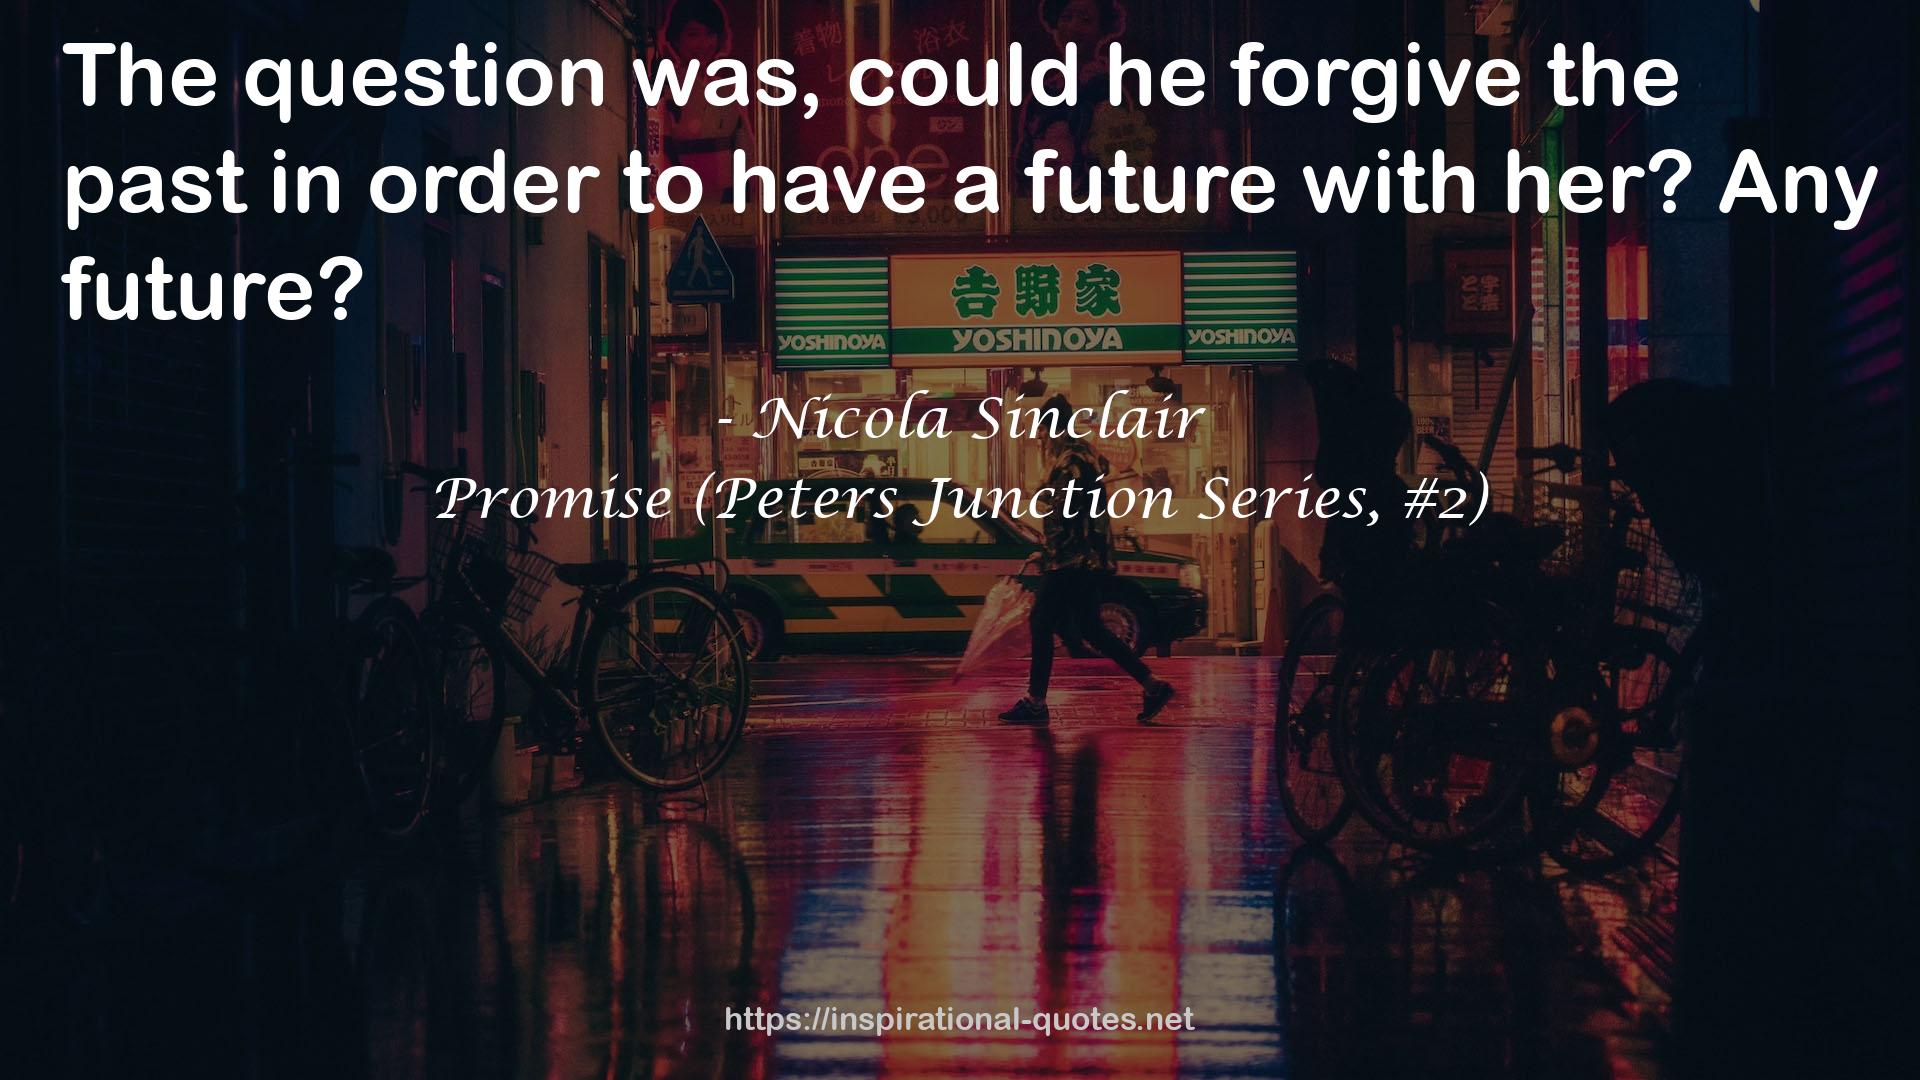 Promise (Peters Junction Series, #2) QUOTES